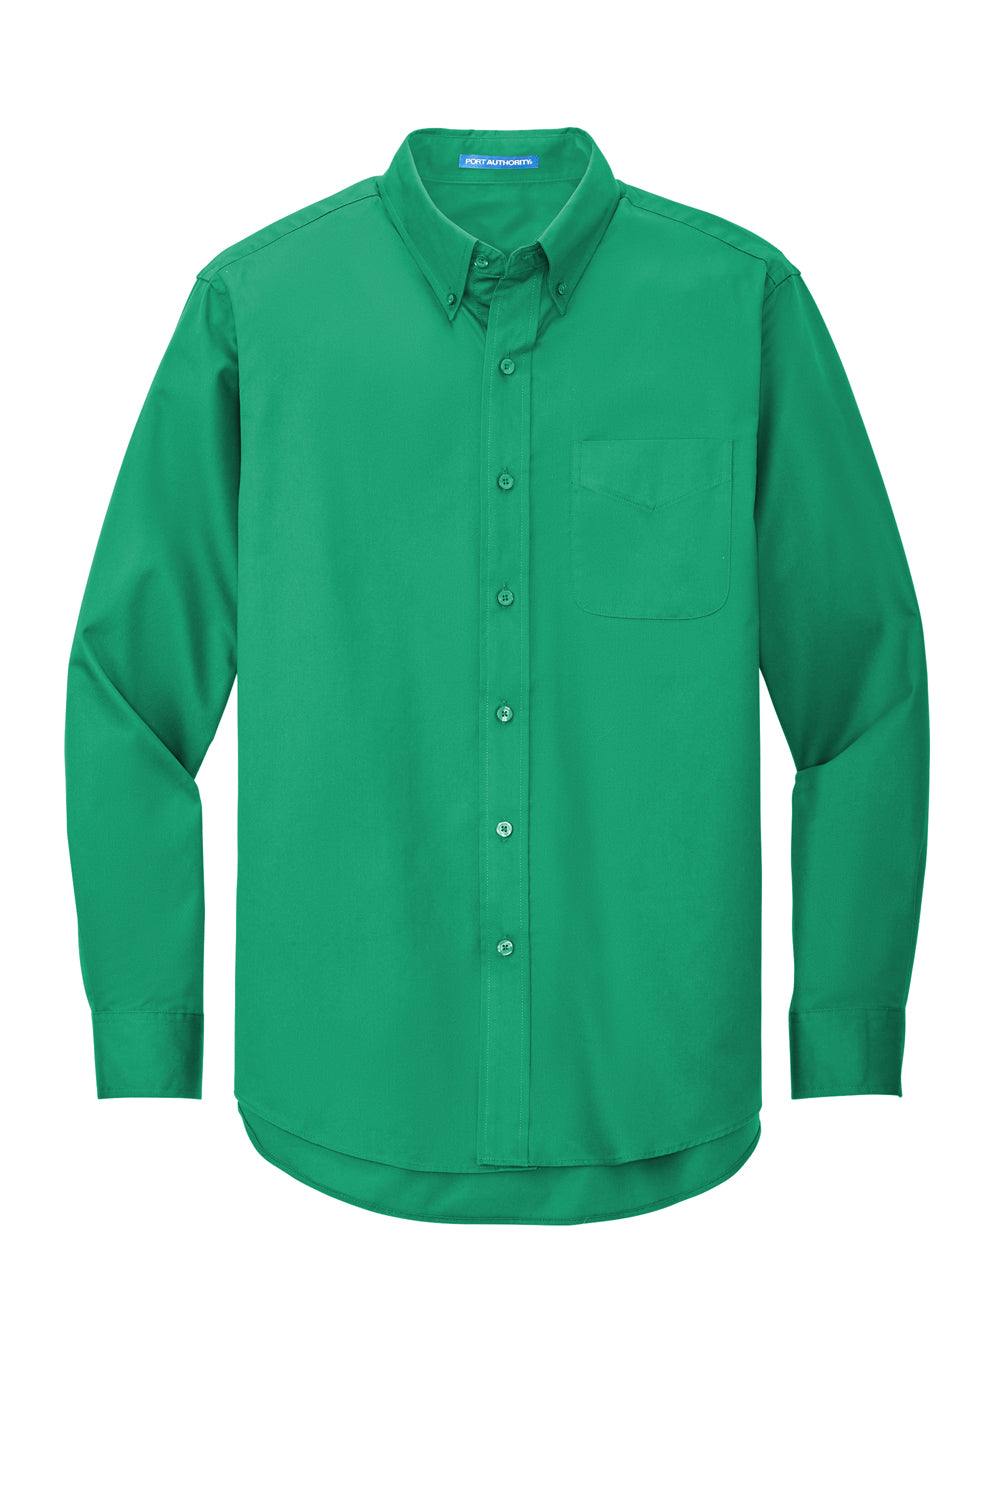 Port Authority S608/TLS608/S608ES Mens Easy Care Wrinkle Resistant Long Sleeve Button Down Shirt w/ Pocket Court Green Flat Front